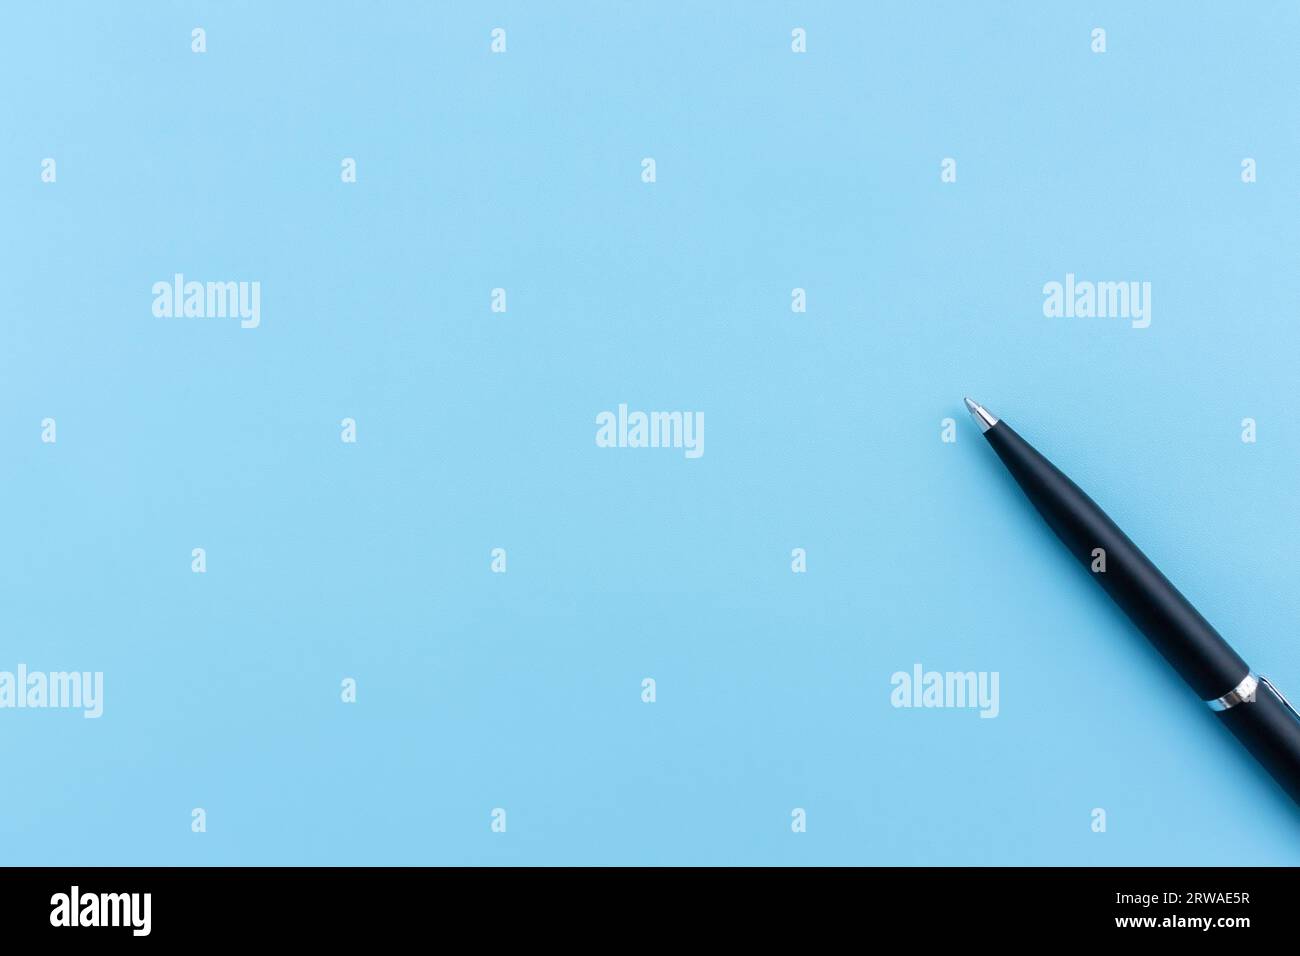 Pen isolated on blue background. After some edits. Stock Photo